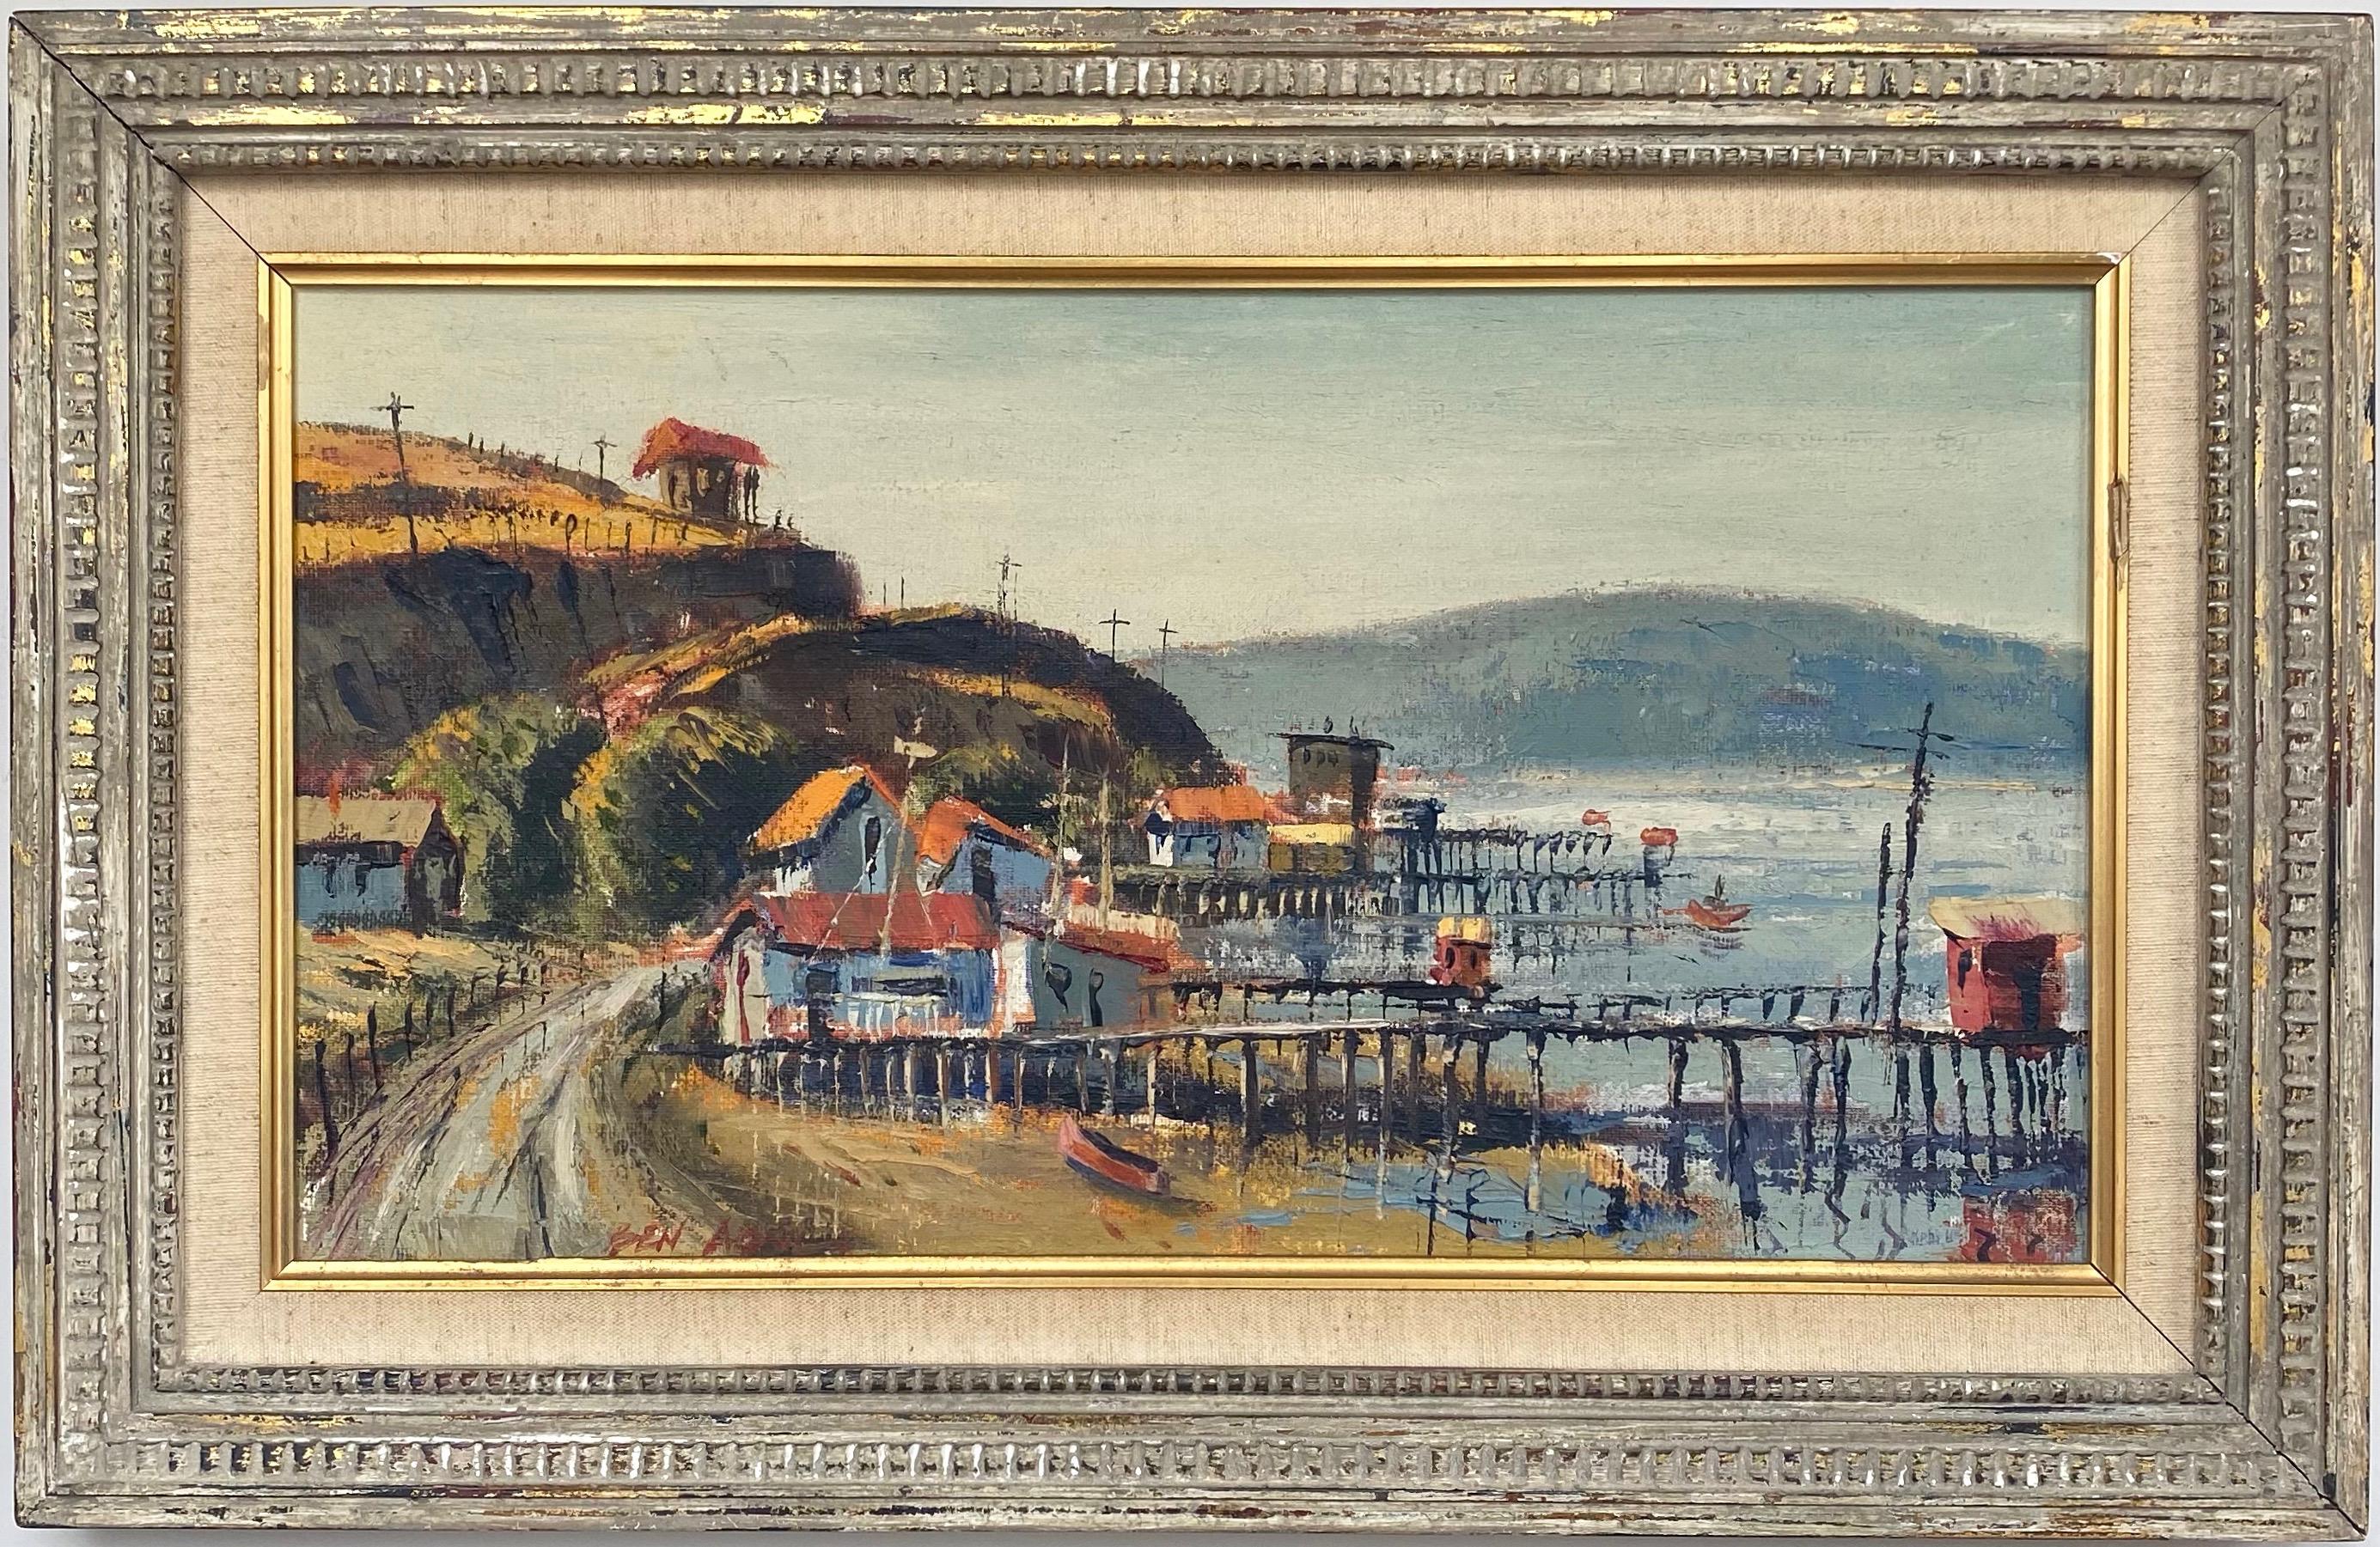 A charmingly evocative 1960s oil on canvas Impressionist landscape & seascape painting titled “Tomales Bay California” by important mid-century Los Angeles artist Ben Abril.

En plein air depiction of the picturesque spot located just up the coast